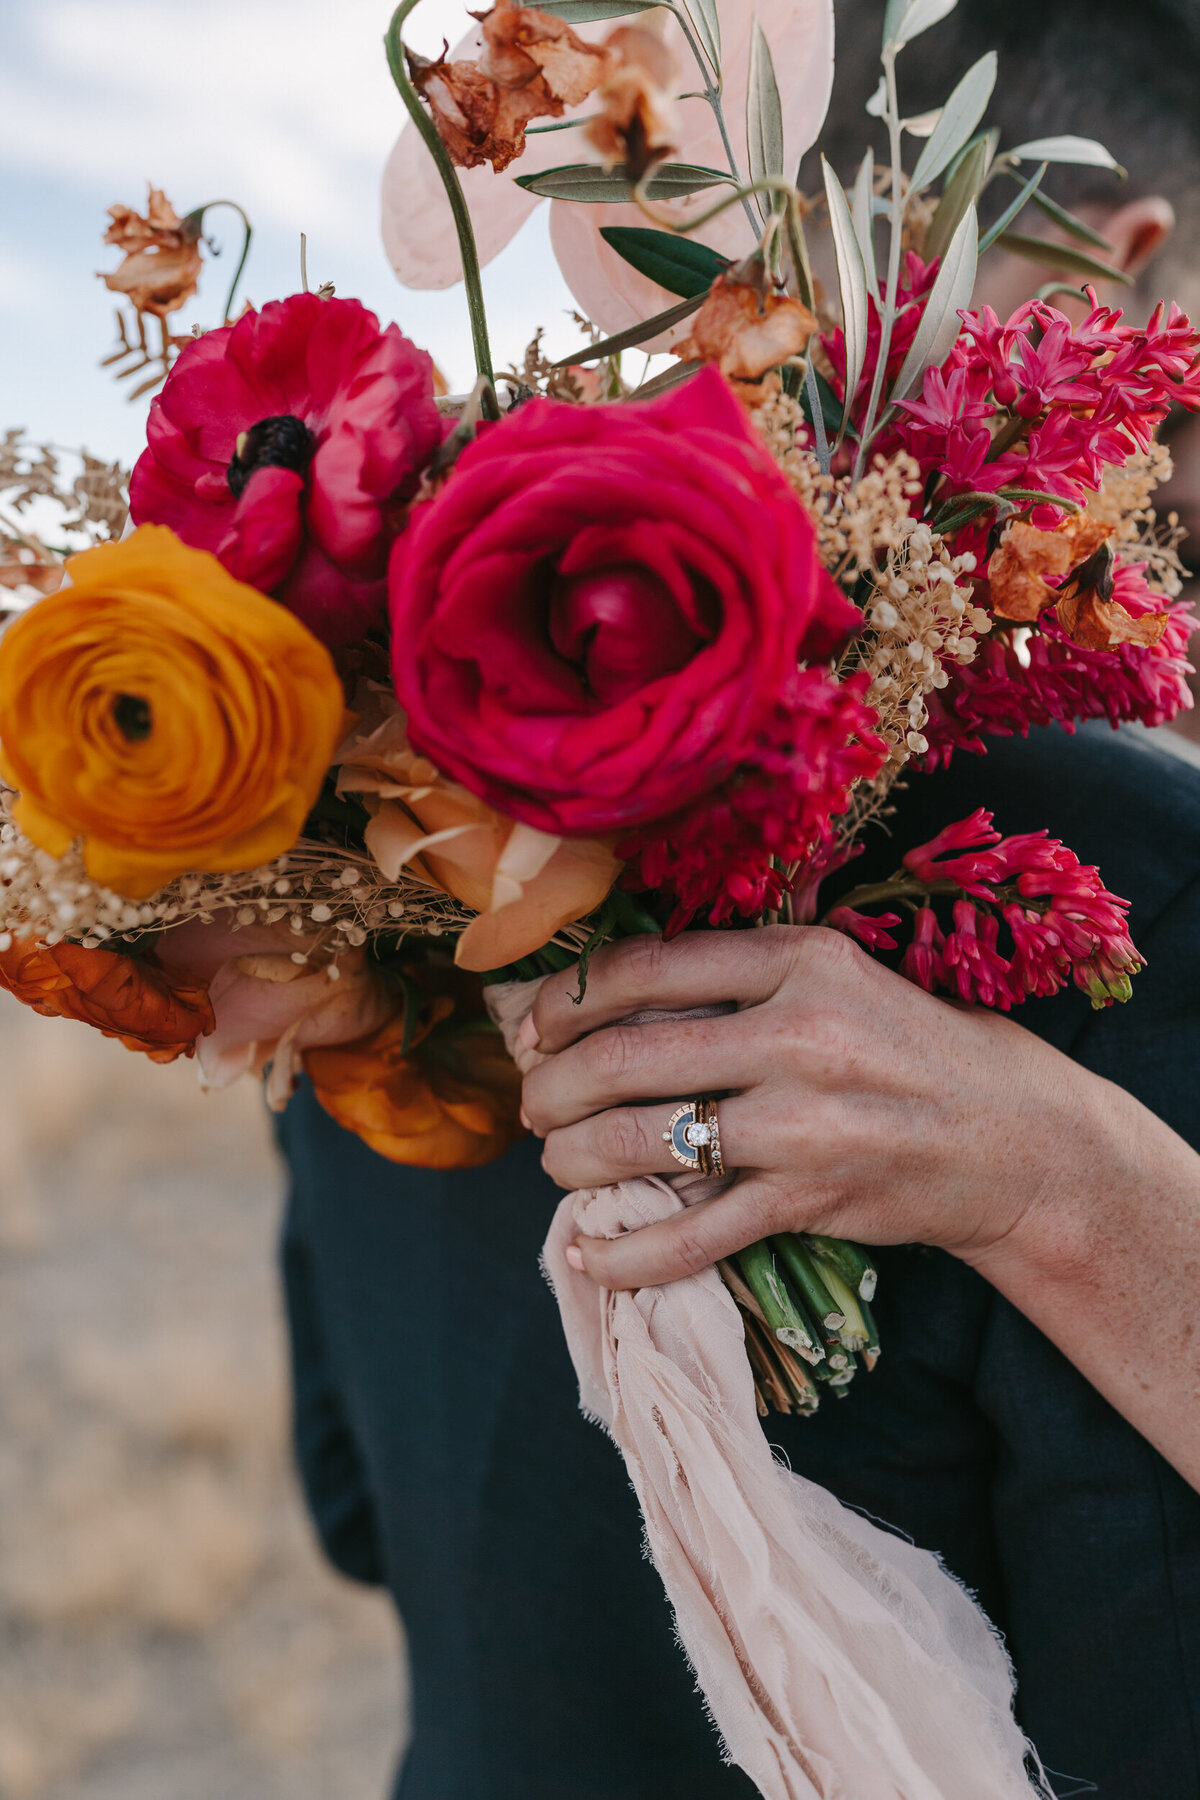 A colorful photograph of Maggie and Caleb on their wedding day at La Tierra in Marfa, Texas. The photograph is a close-up of the bride holding her bouquet behind the back of the groom. The wedding ring is sparking. The ring is soft gold with a diamond in the center. The wedding band is a row of diamonds on one side and a half circle of gray stone and diamonds on the other side. The bouquet the bride is holding is magenta, orange and yellow and blue-ish green eucalyptus with a light pink soft ribbon flowing down. Wedding photography by Stacie McChesney/Vitae Weddings.